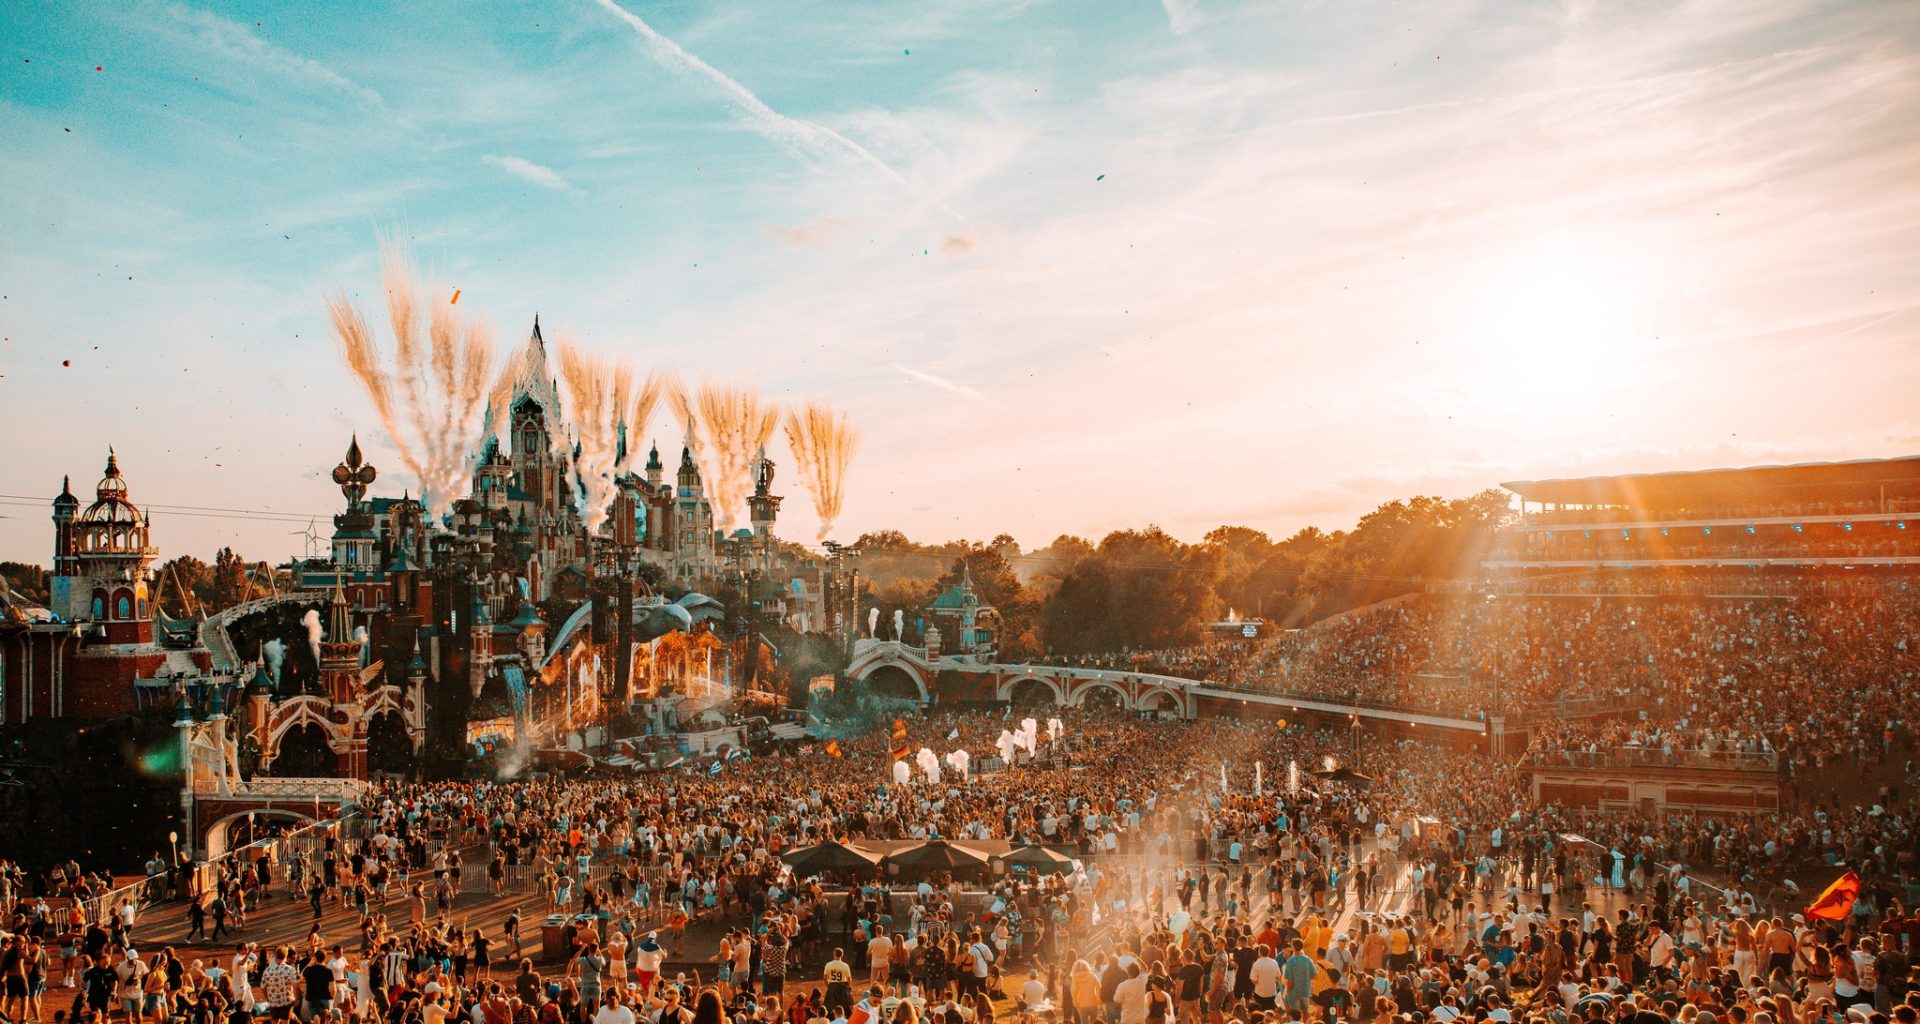 Mainstage of Tomorrowland with huge crowd of people during the sunset